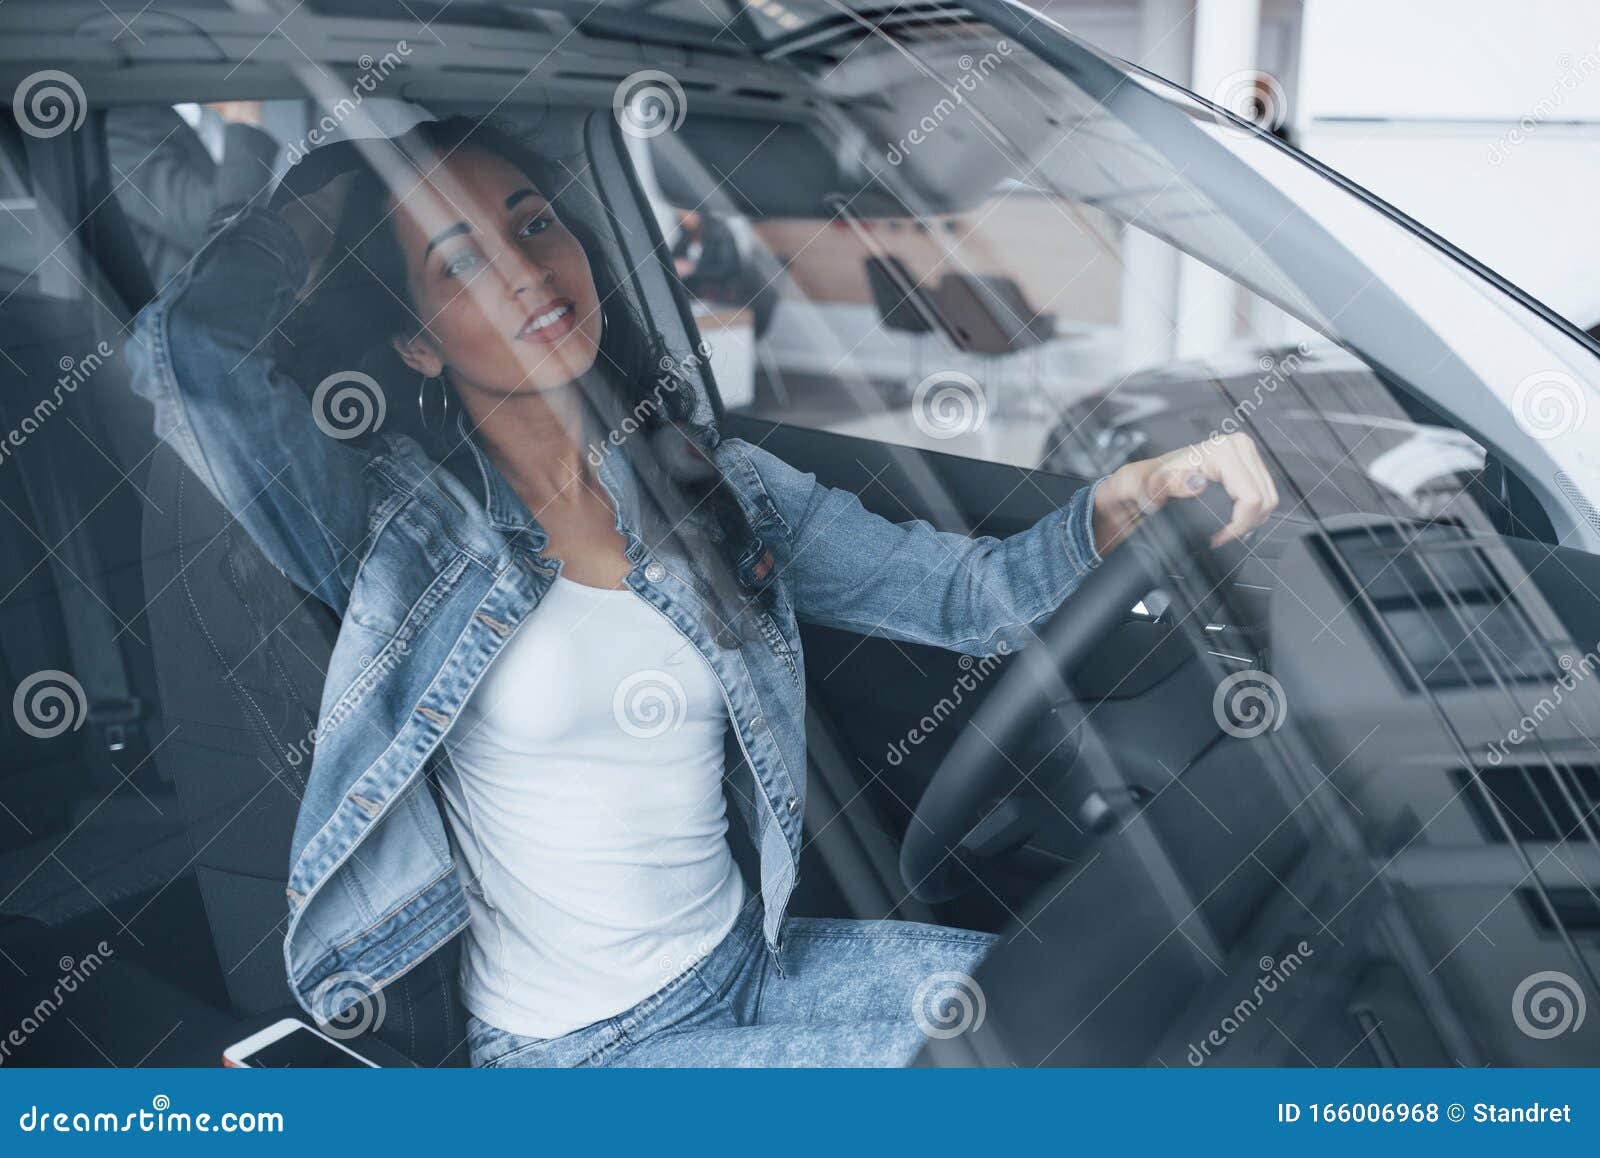 young and beautiful. cute girl with black hair trying her brand new expensive car in the automobile salon